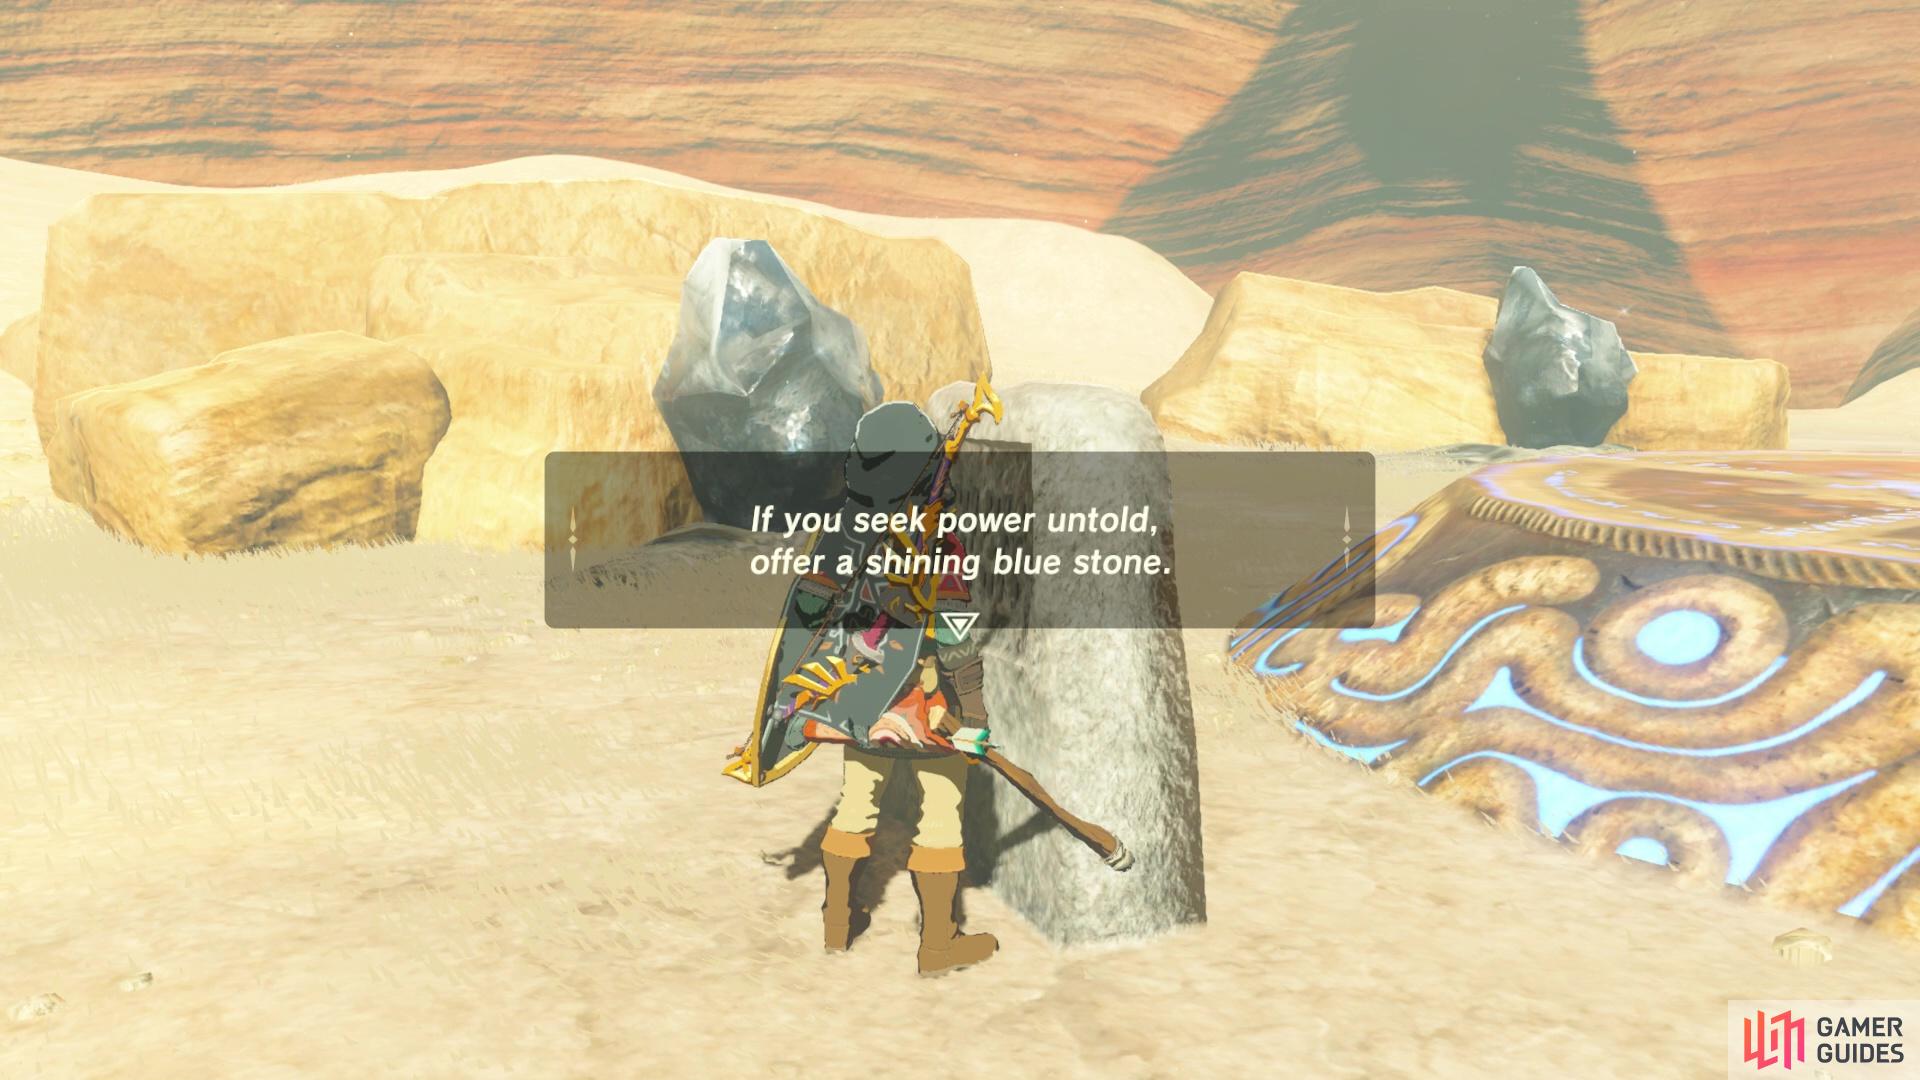 The stone slab has a riddle you’ll need to solve to reveal the shrine.